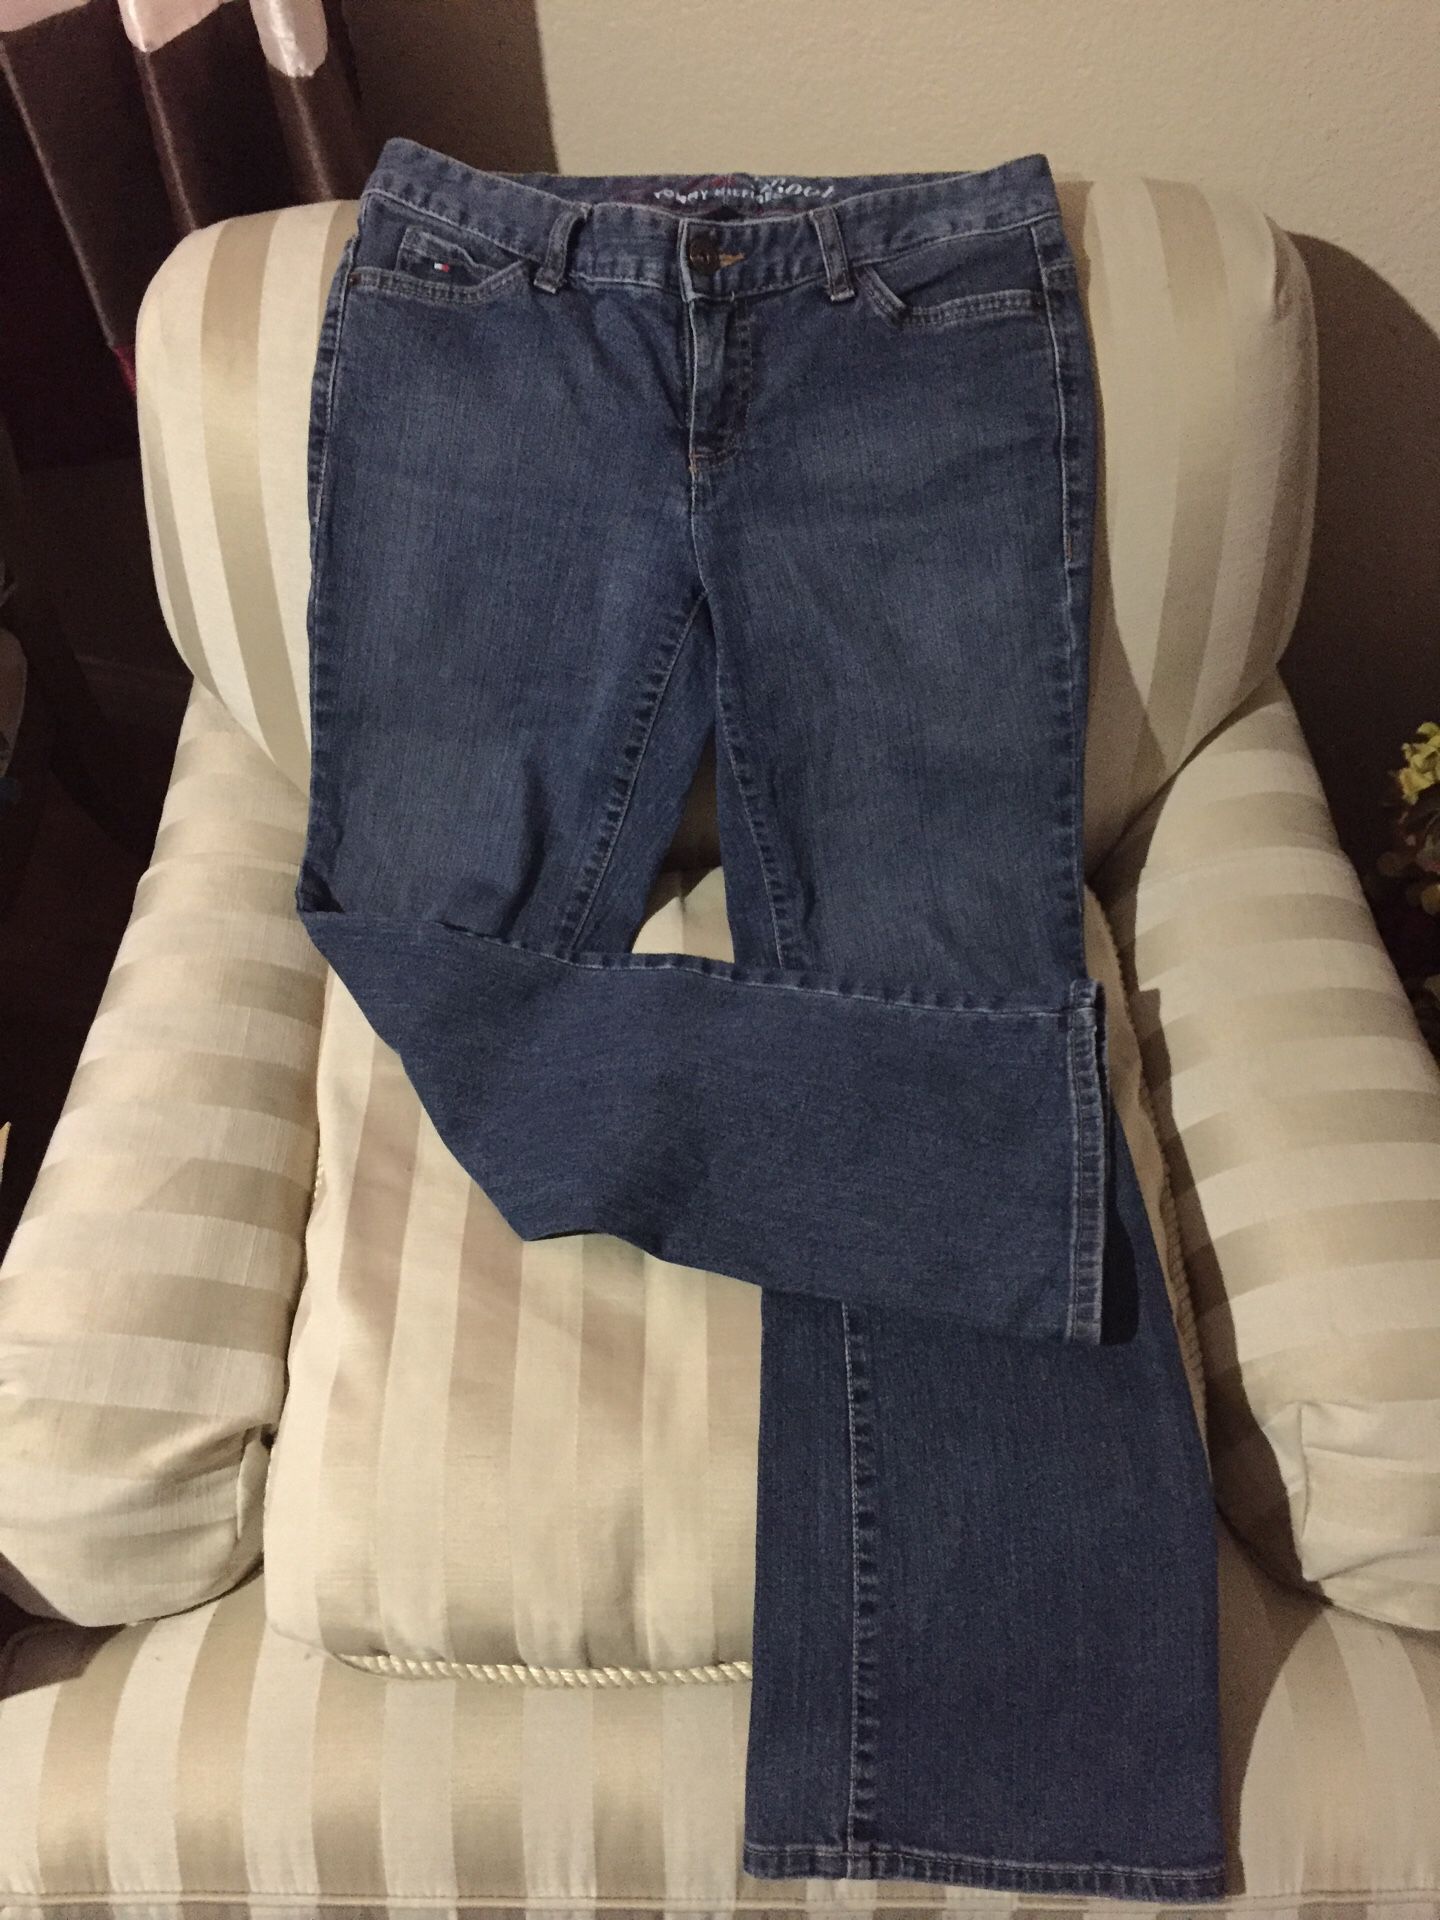 Krydderi Valg sengetøj Tommy Hilfiger Freedom Boot Jeans Sz 6 Quality Pants Woman's Jrs Ladies $7  A008 for Sale in Henderson, NV - OfferUp